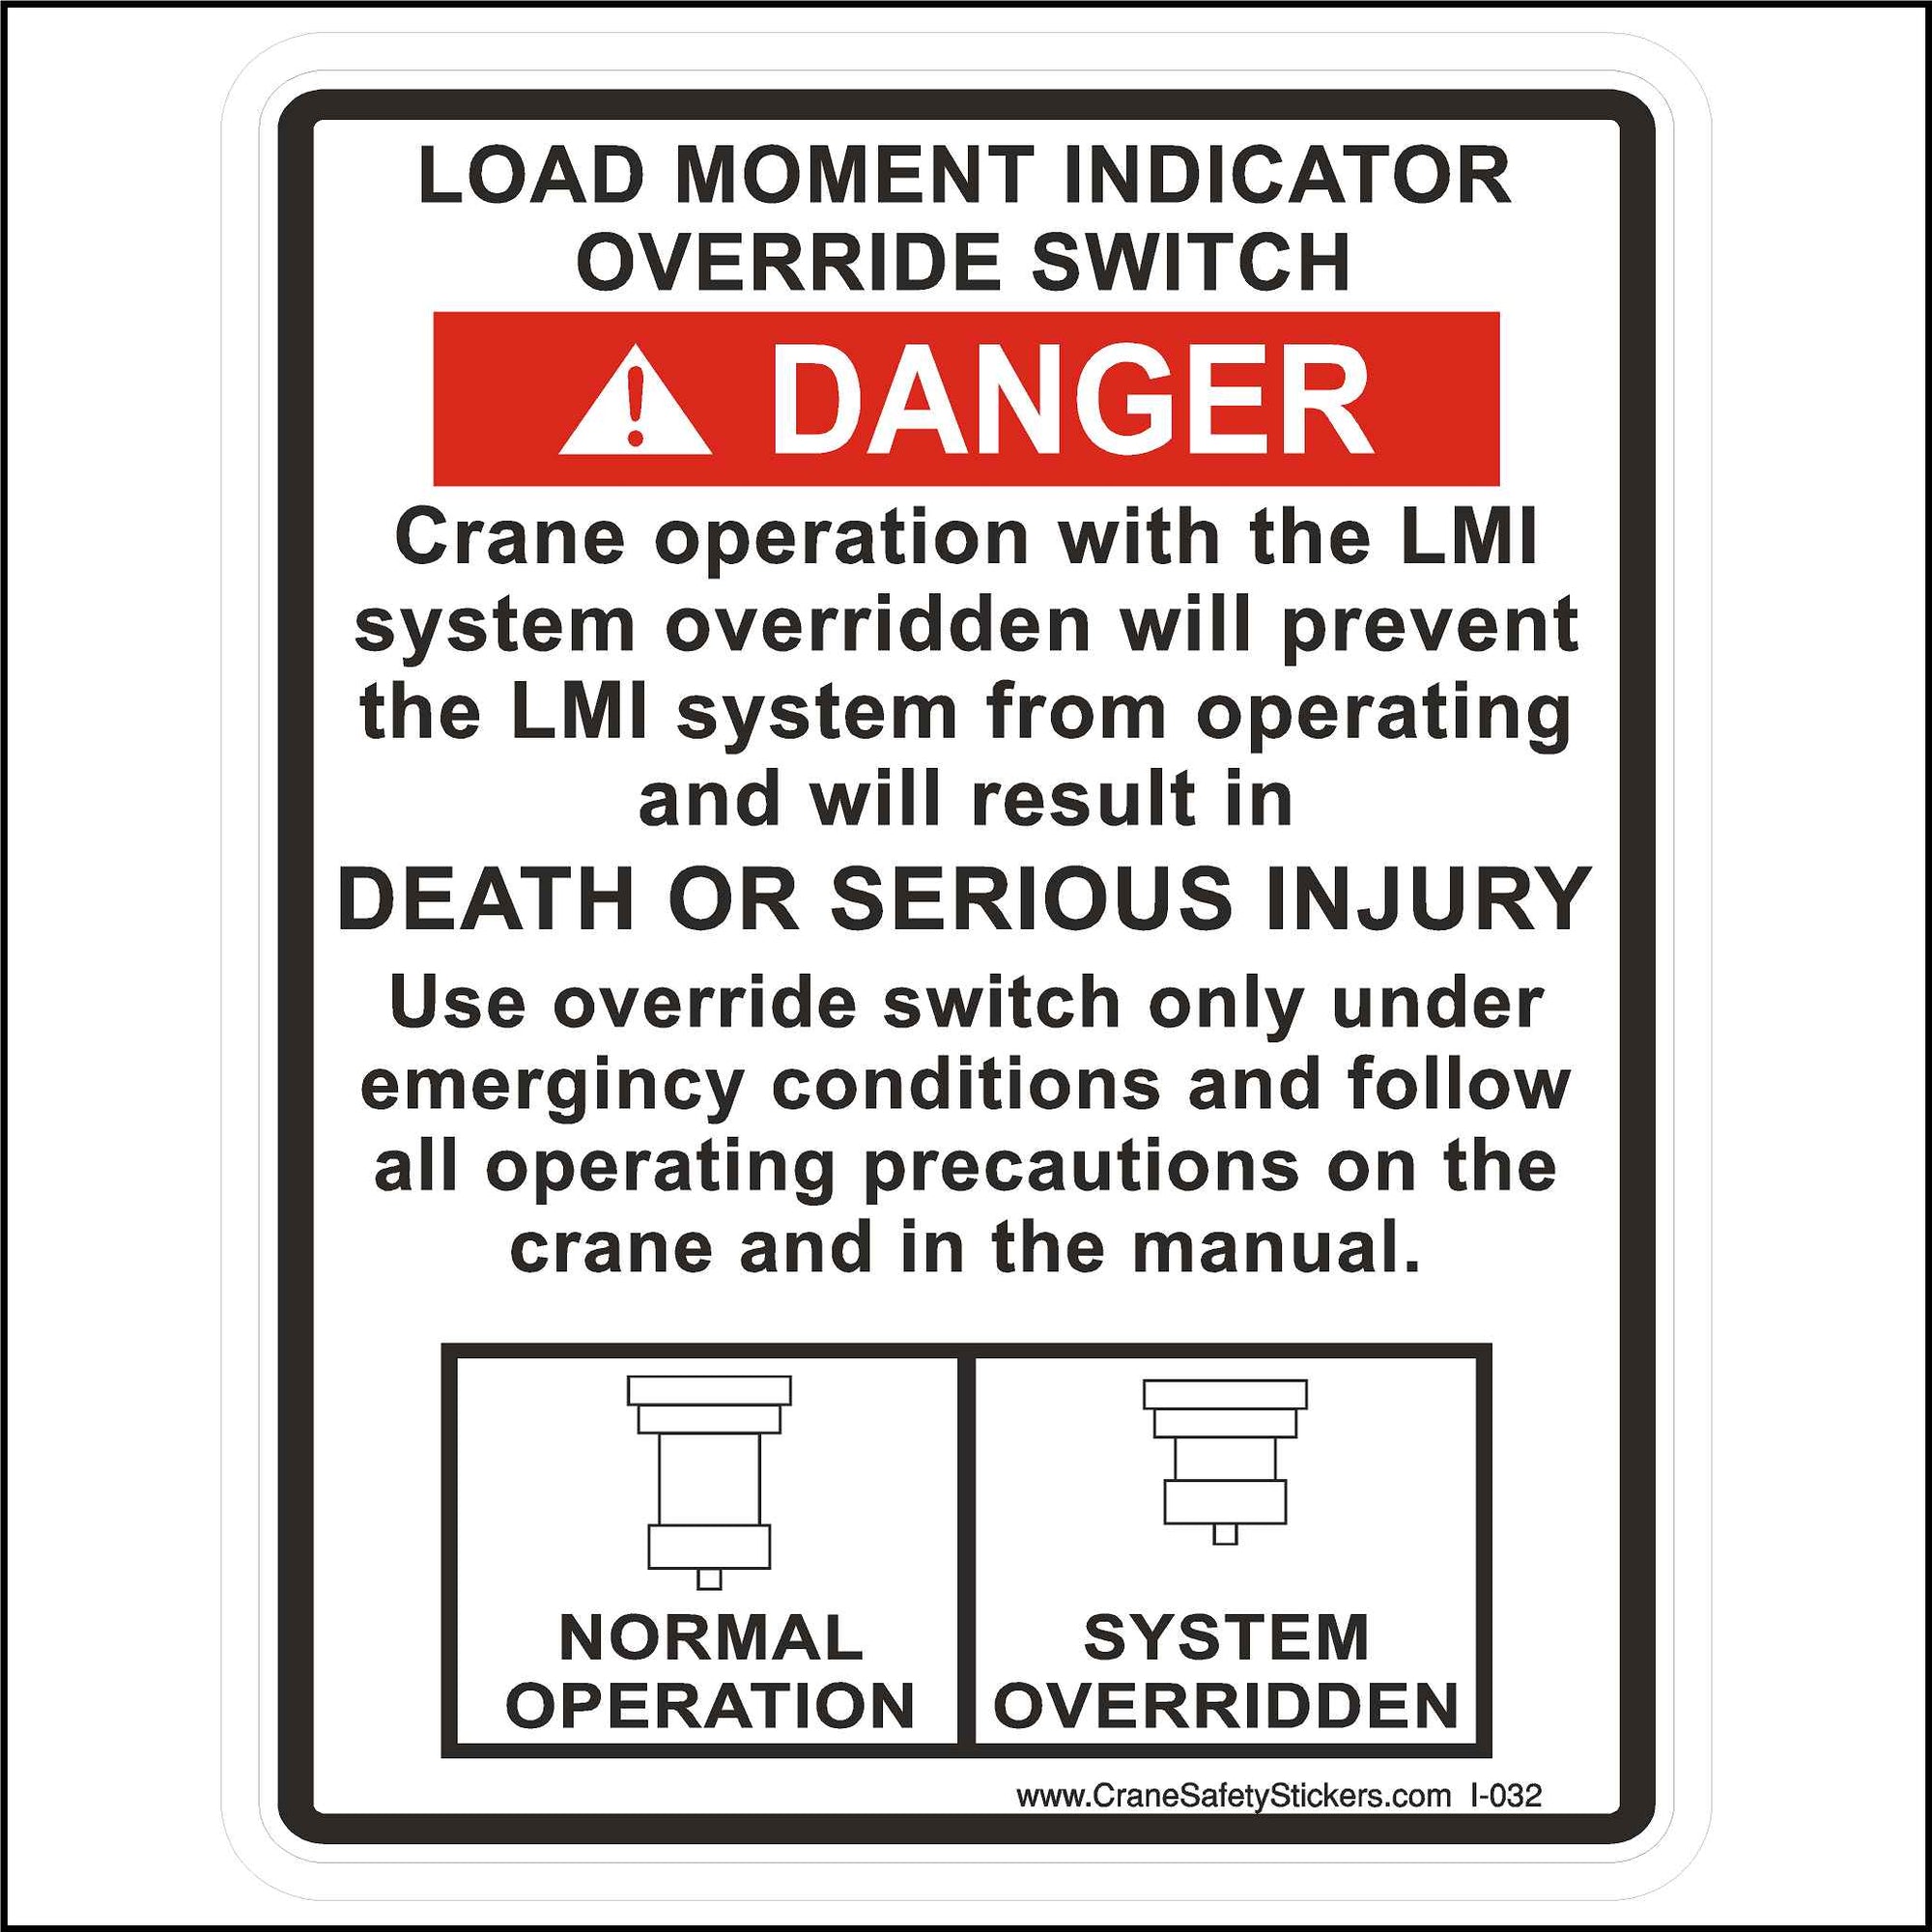 This Load Moment Indicator Override Switch Decal Is Printed With. LOAD MOMENT INDICATOR OVERRIDE SWITCH.  DANGER  Crane operation with the LMI system overridden will prevent the LMI system from operating and will result in DEATH OR SERIOUS INJURY.  Use override switch only under emergency conditions and follow all operating precautions on the crane and in the manual.